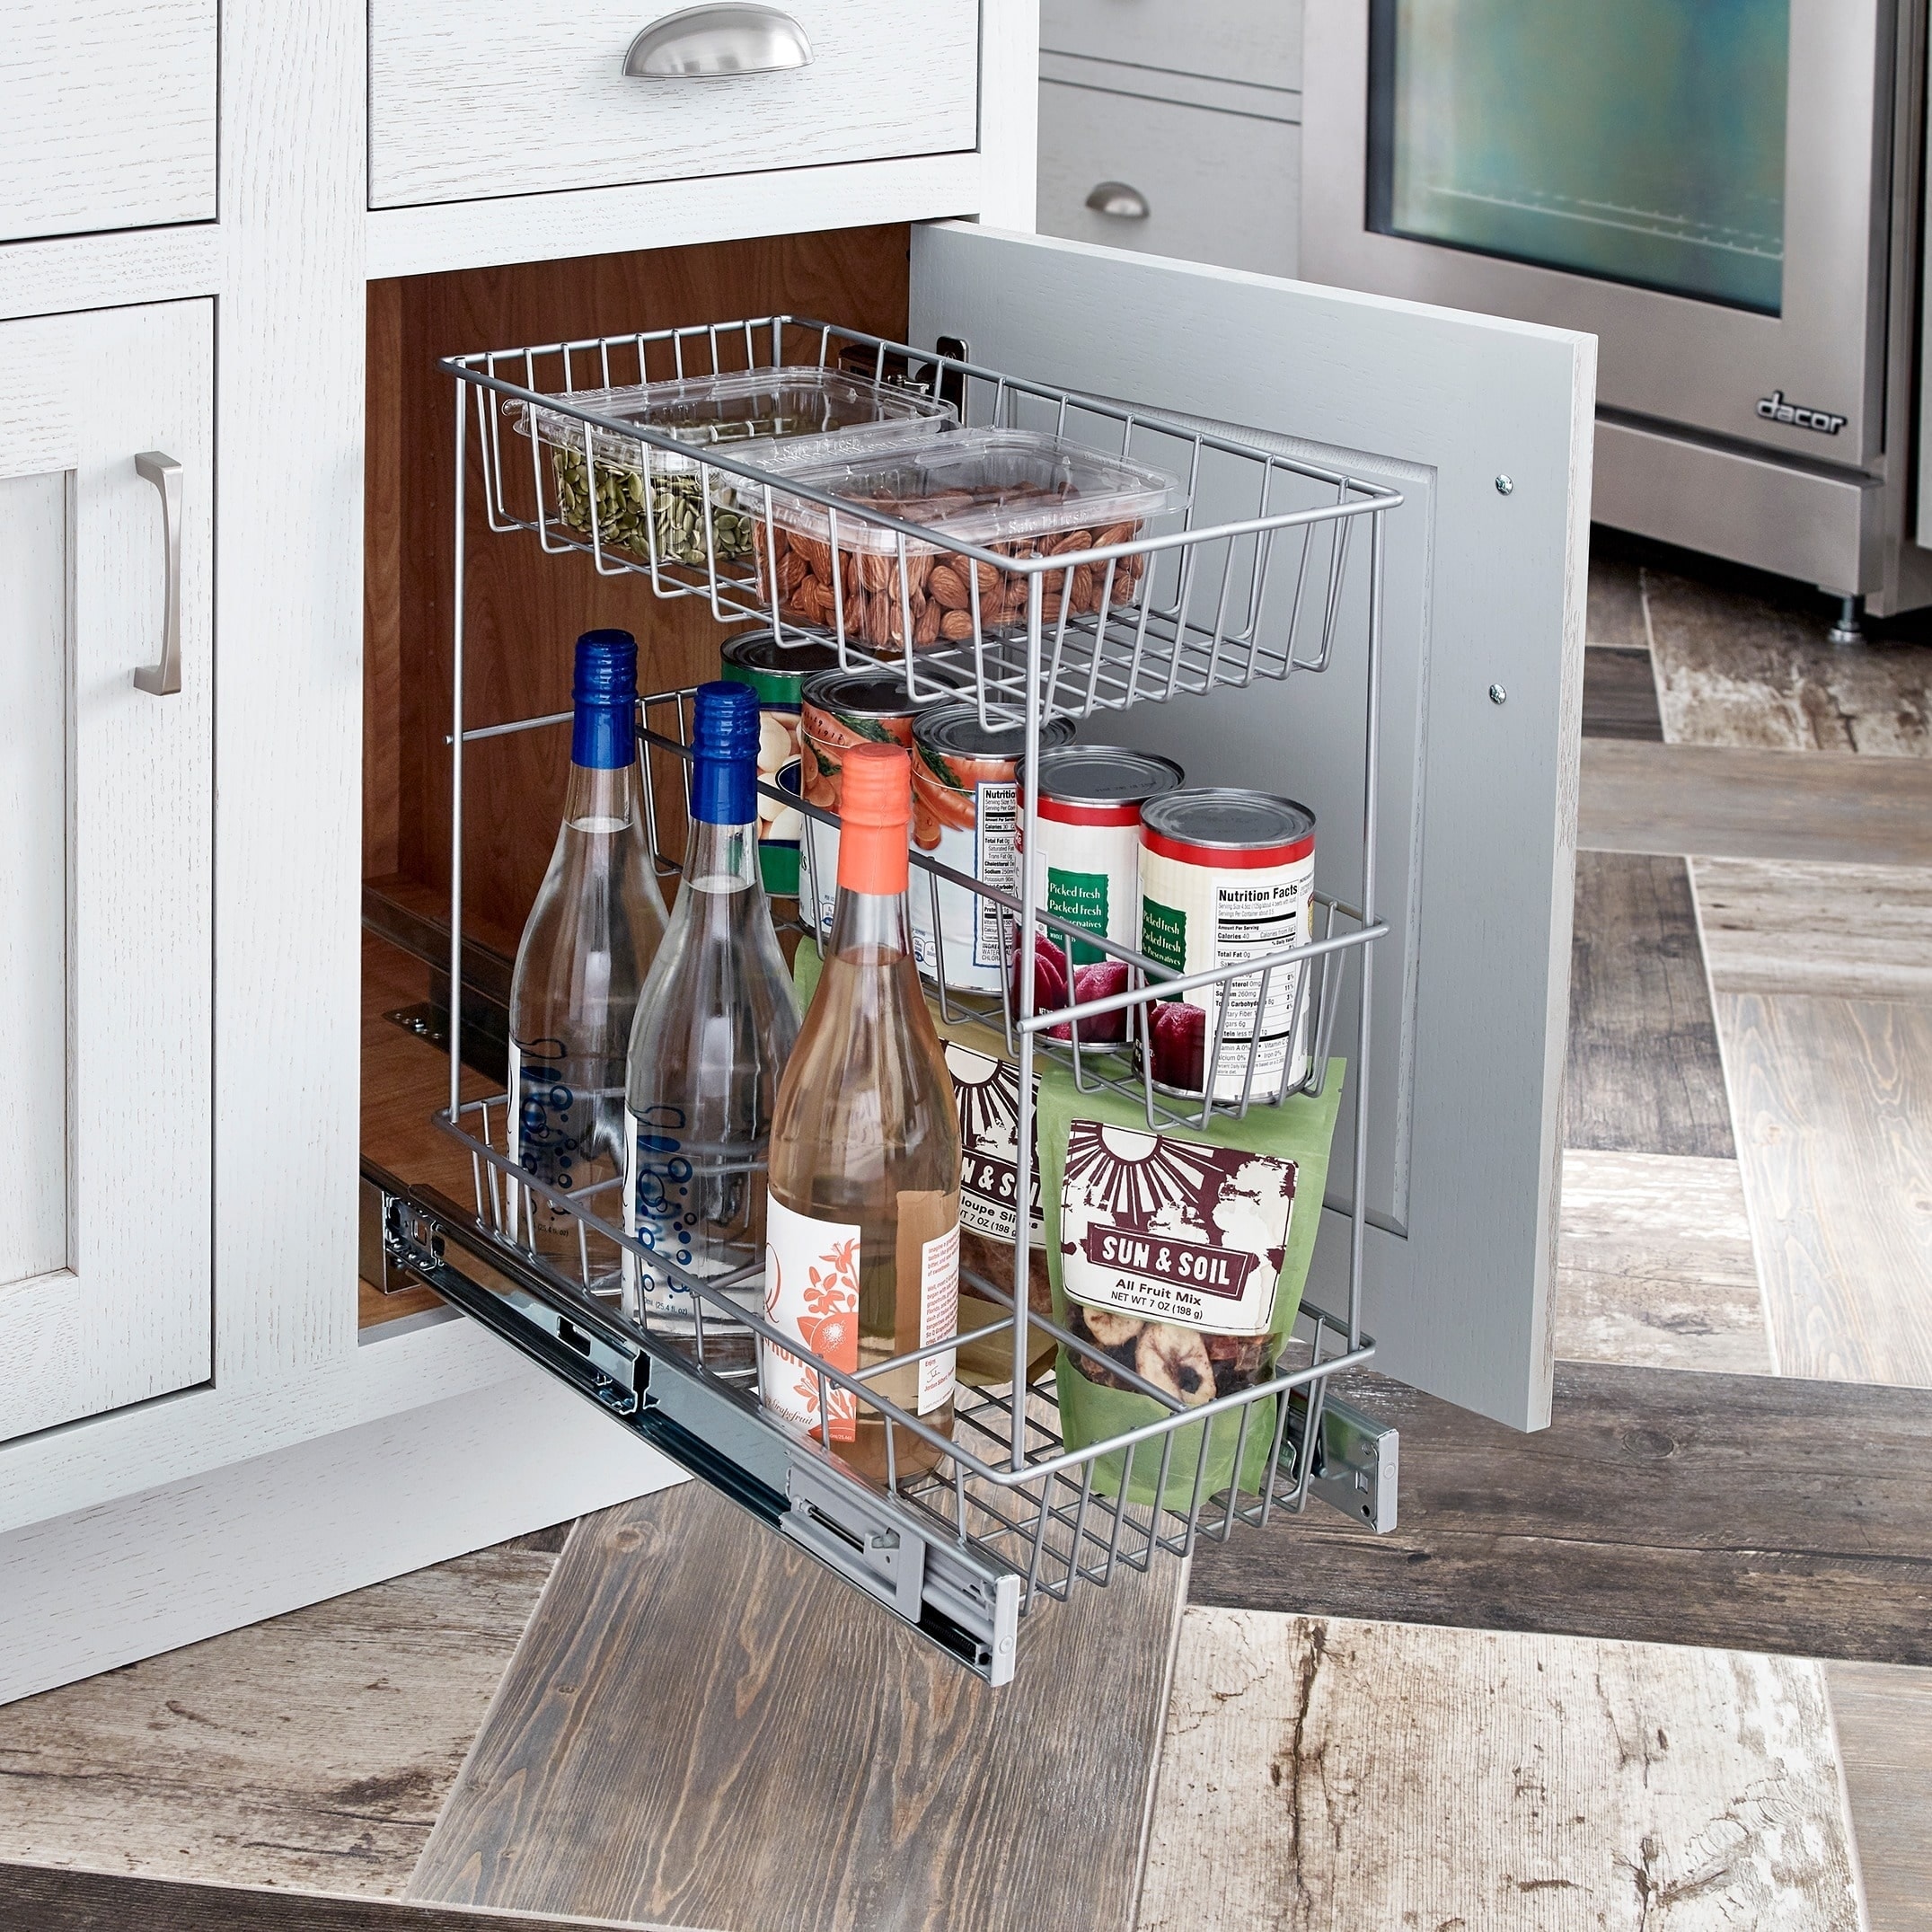 ClosetMaid Nickel-finished Steel Pull-out Cabinet Organizer - On